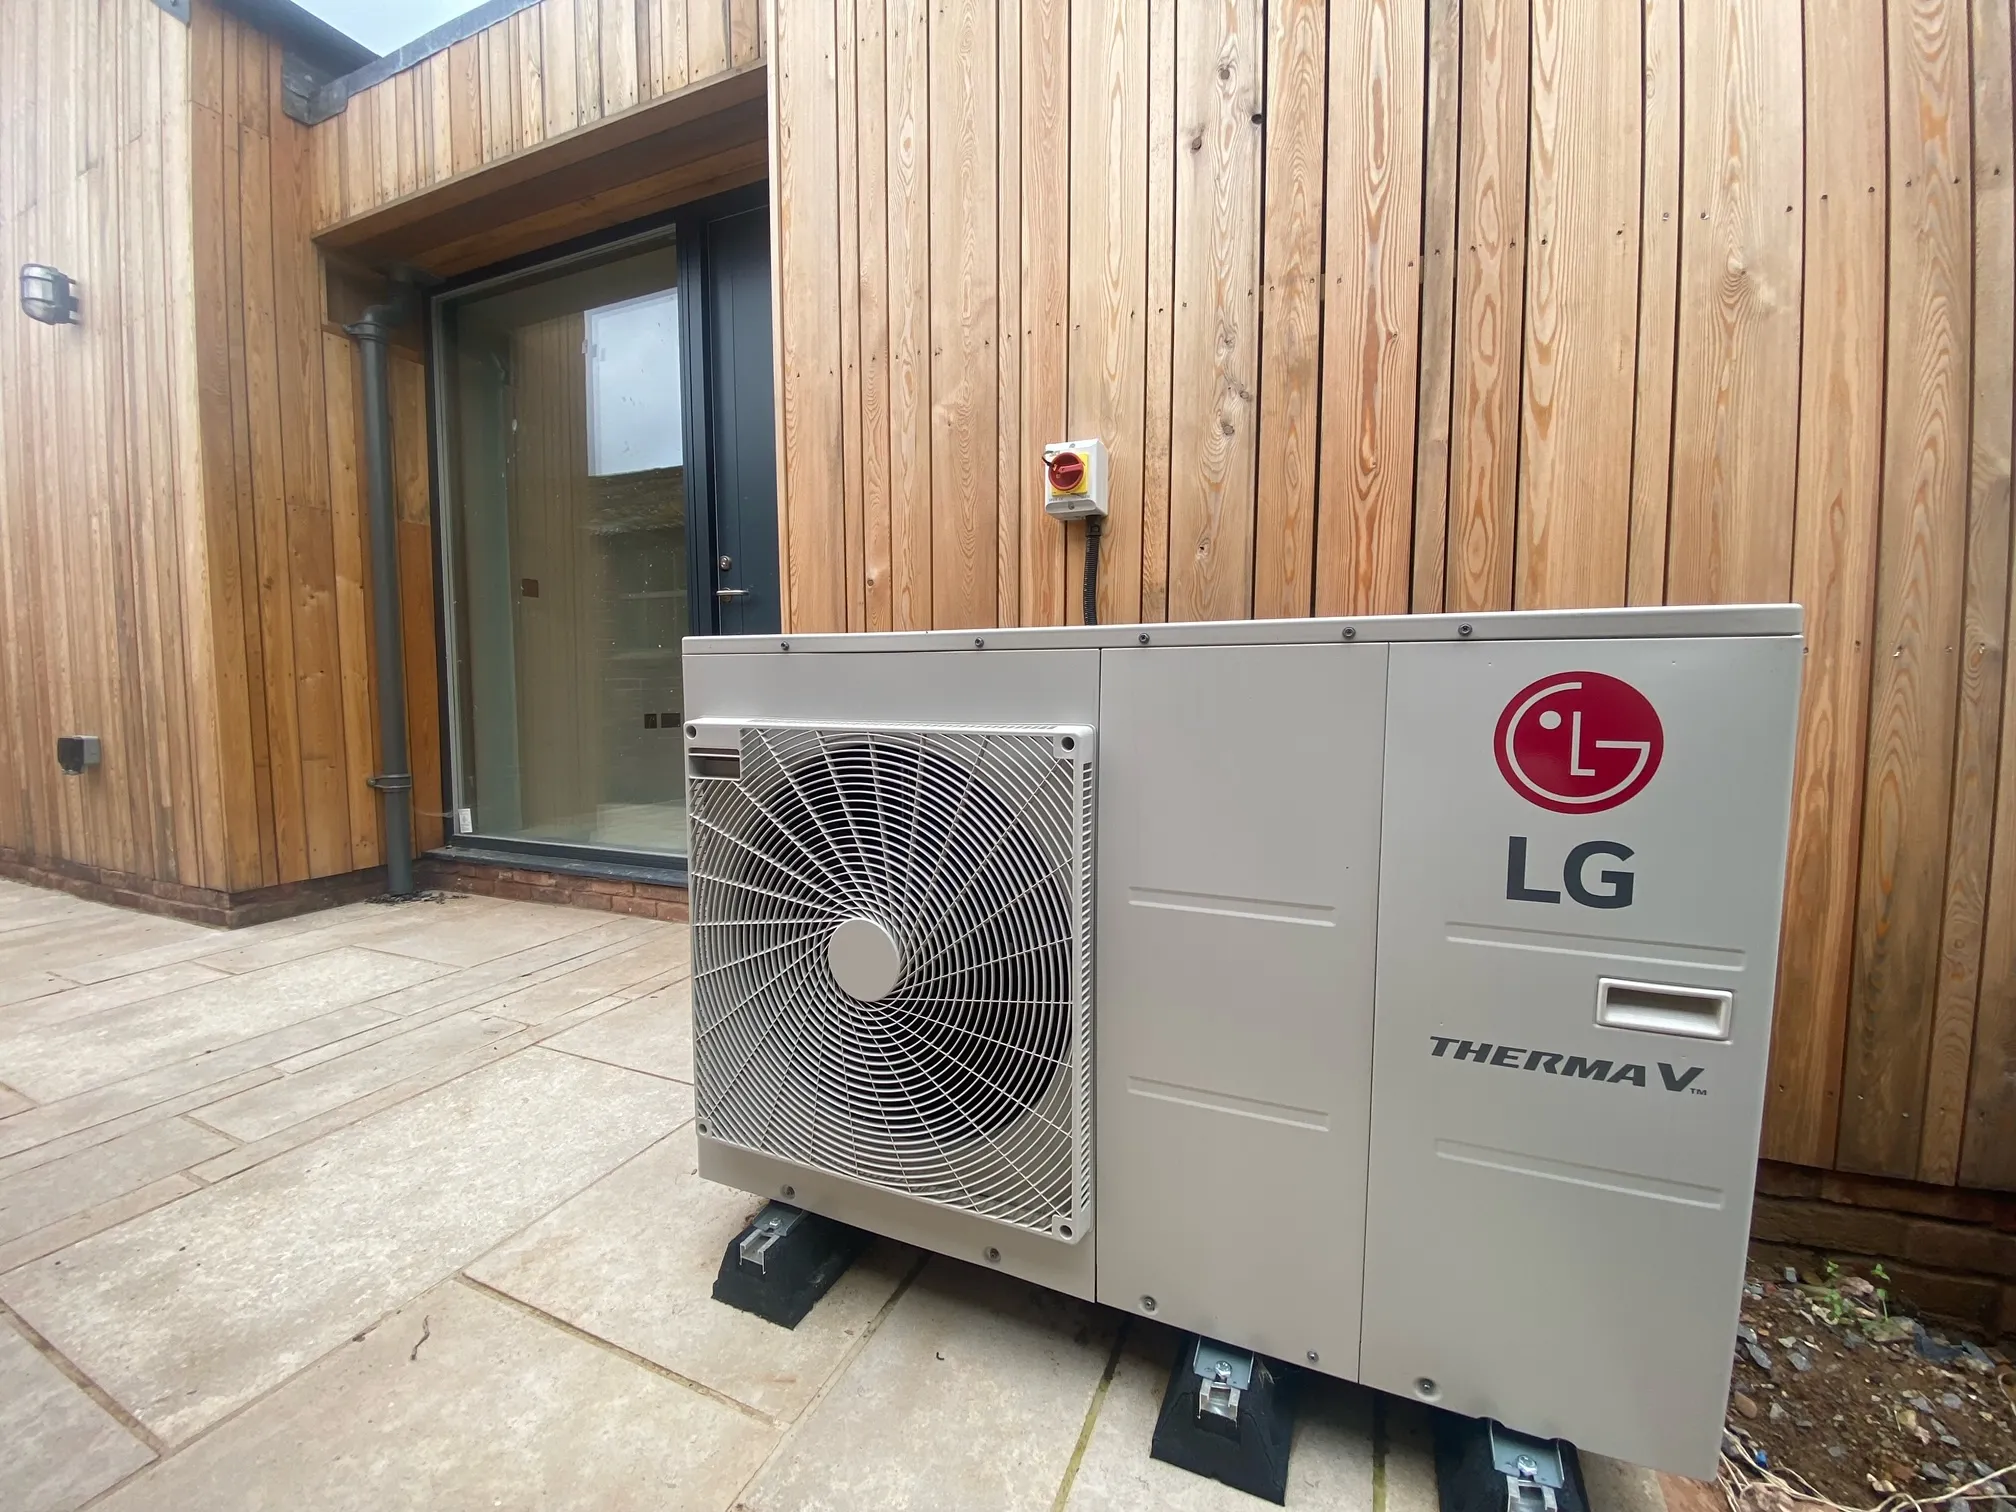 Life's Good with an LG heat pump providing the heating and hot water